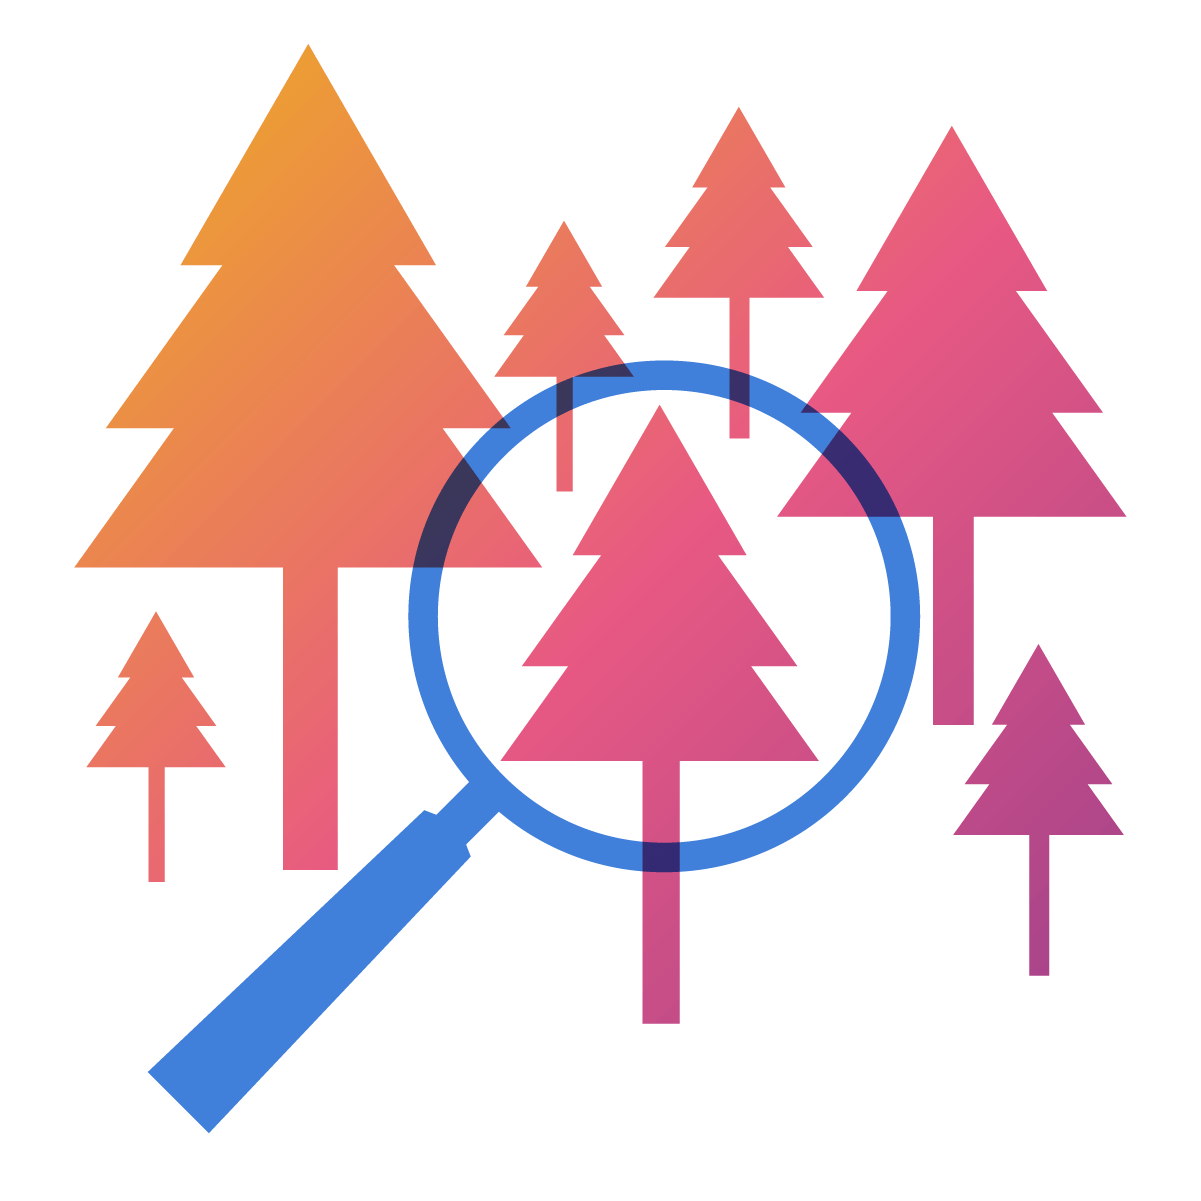 Traditional web analytics miss the forest for the trees